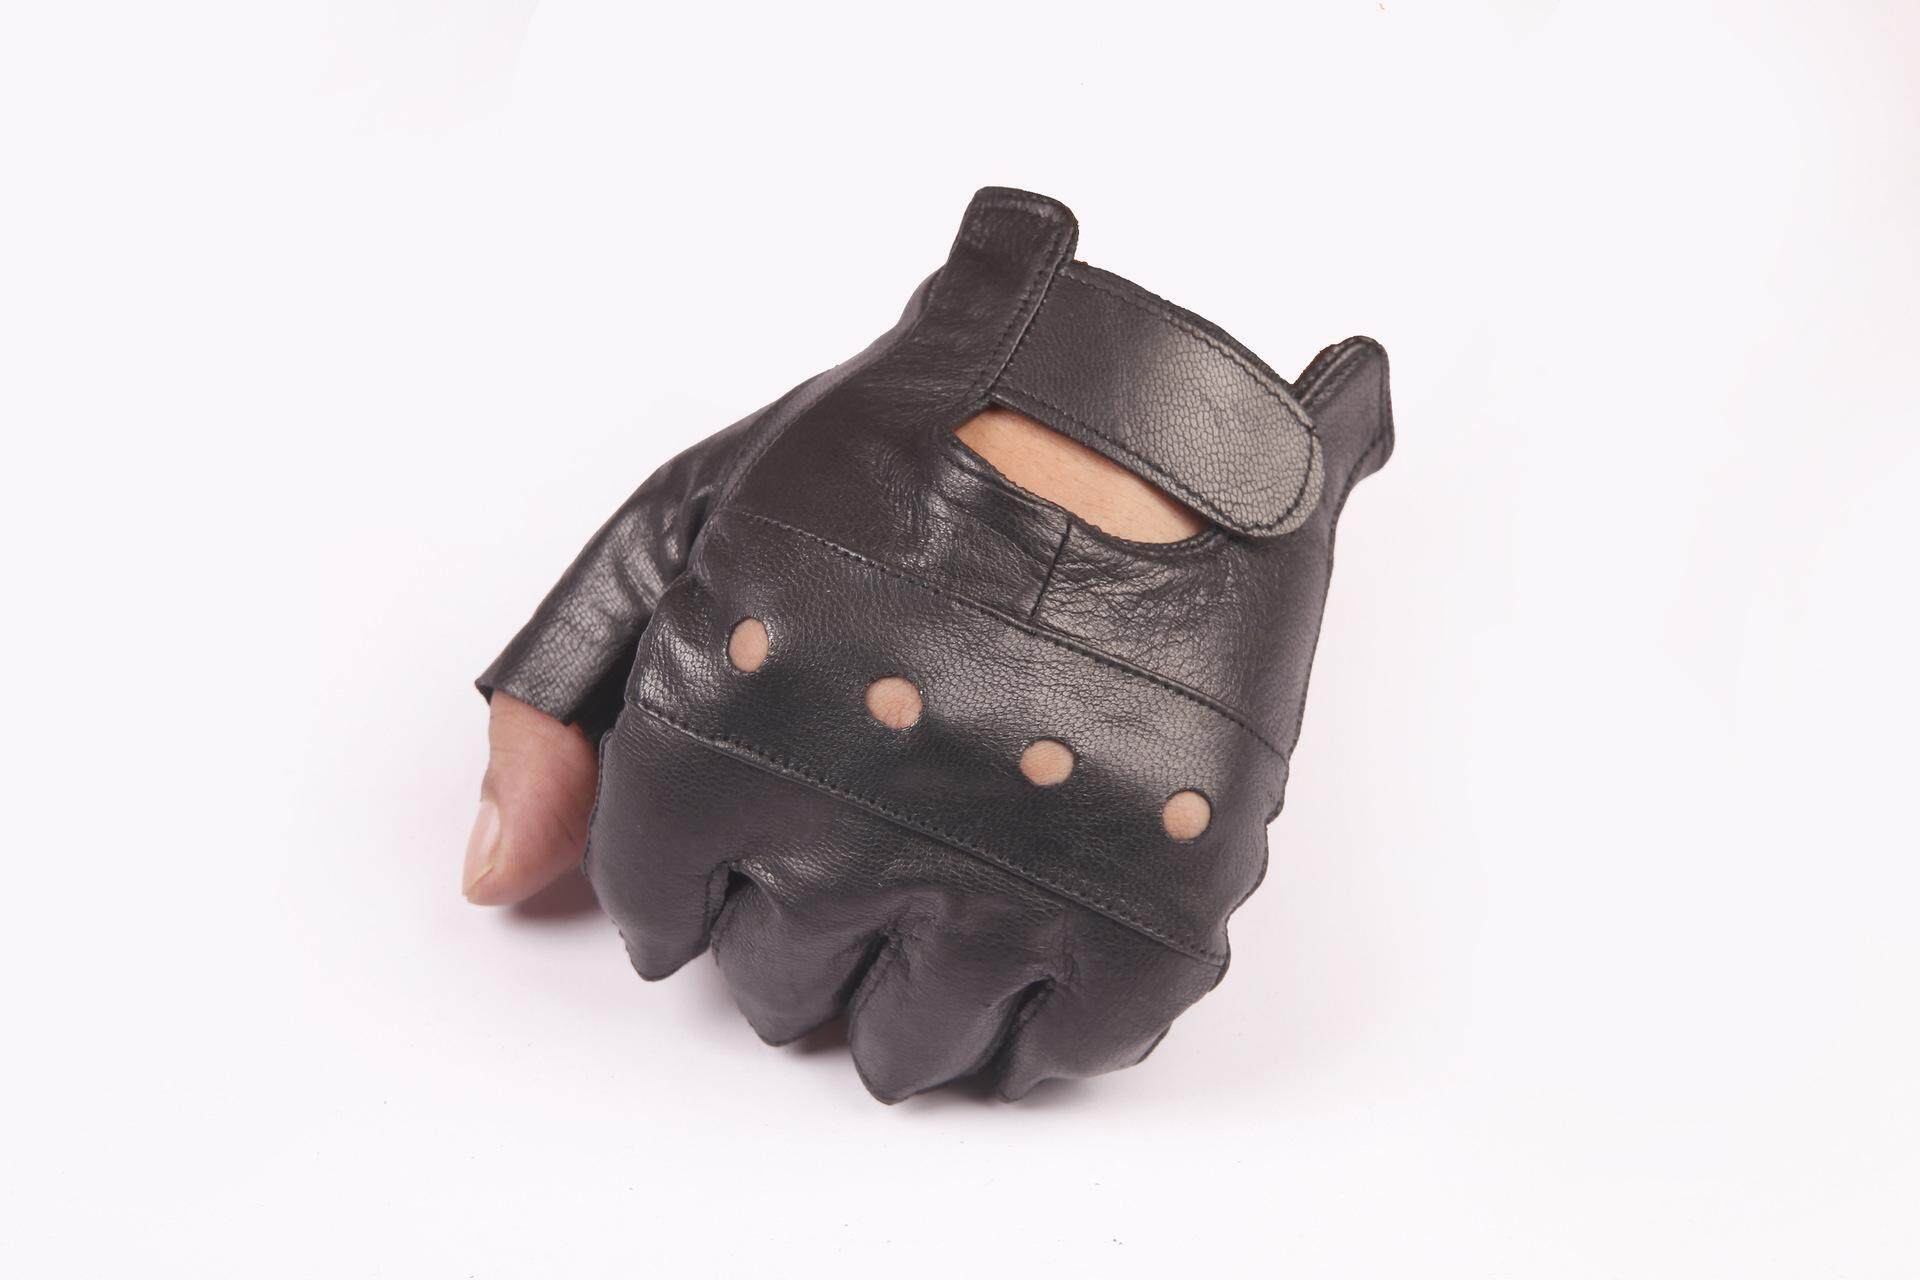 MENS COWHIDE LEATHER FINGERLESS DRIVING MOTORCYCLE BIKER GLOVES NEW XS-3XL